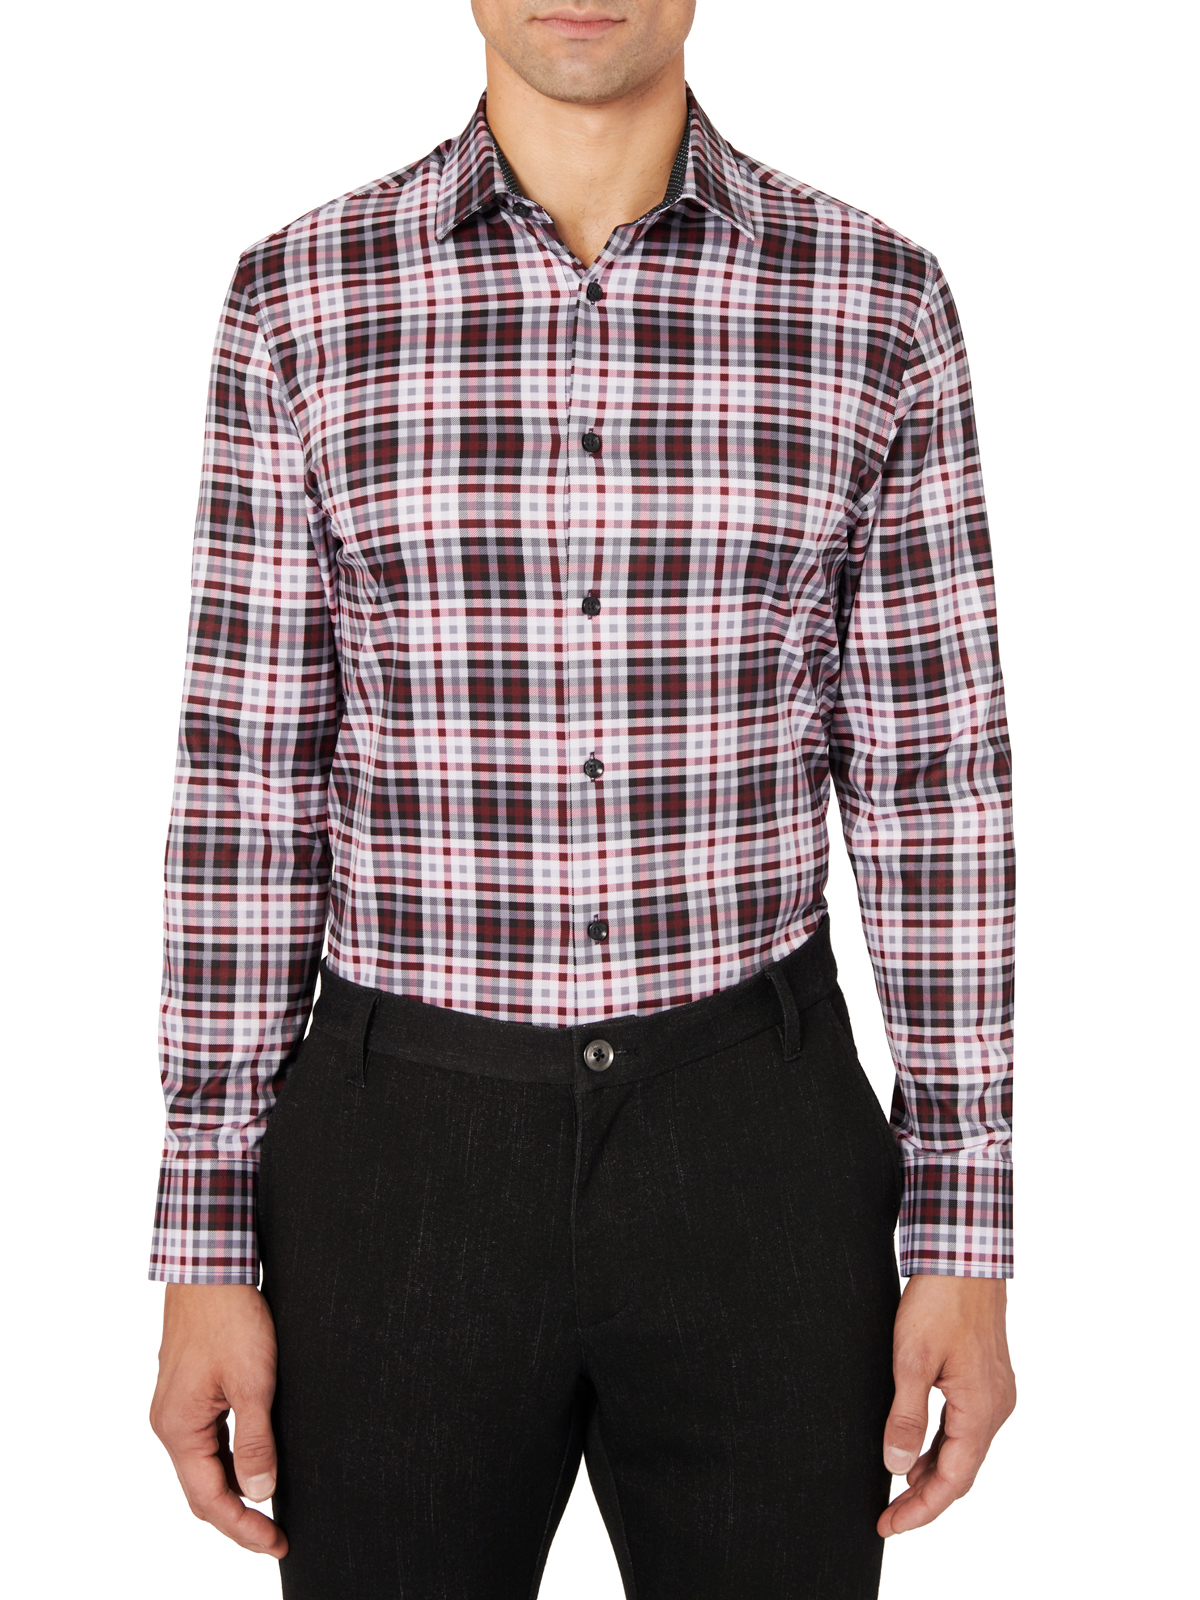 LARGE CHECK COOLING PERFORMANCE STRETCH DRESS SHIRT